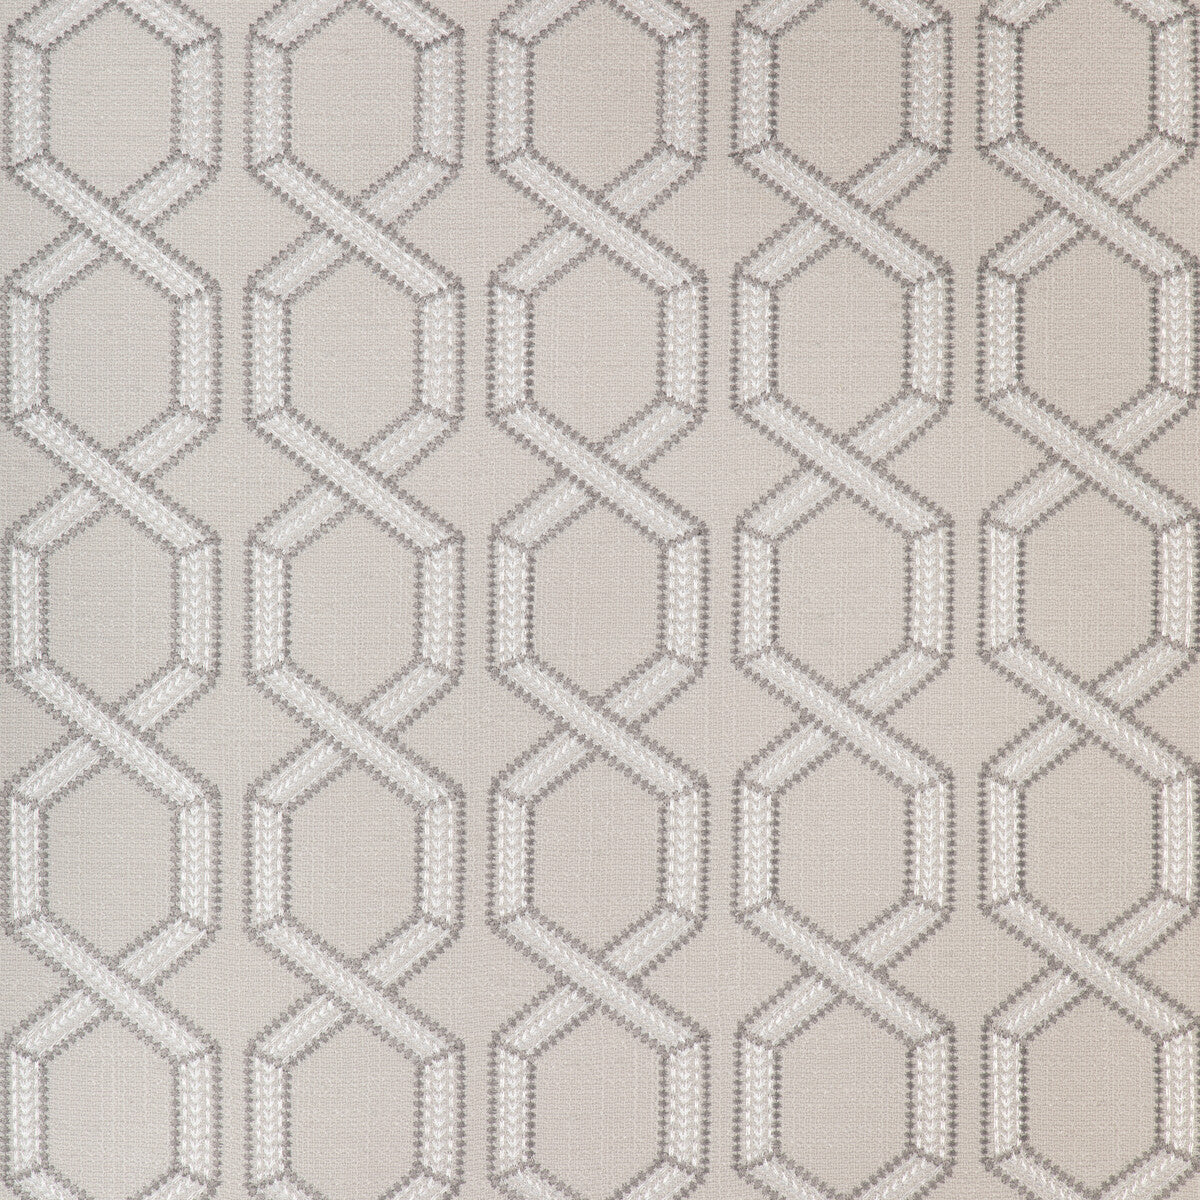 Kravet Basics fabric in 37164-106 color - pattern 37164.106.0 - by Kravet Basics in the Modern Embroideries III collection